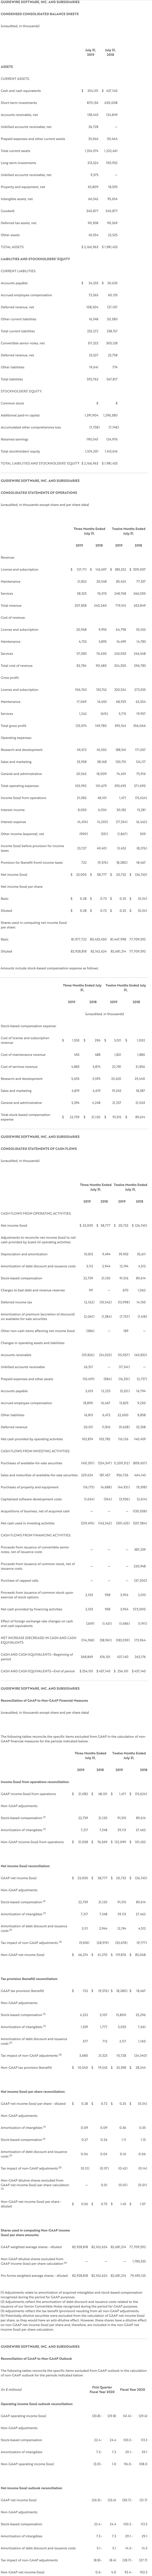 Fourth Fiscal Quarter and Fiscal Year 2019 Tab 3